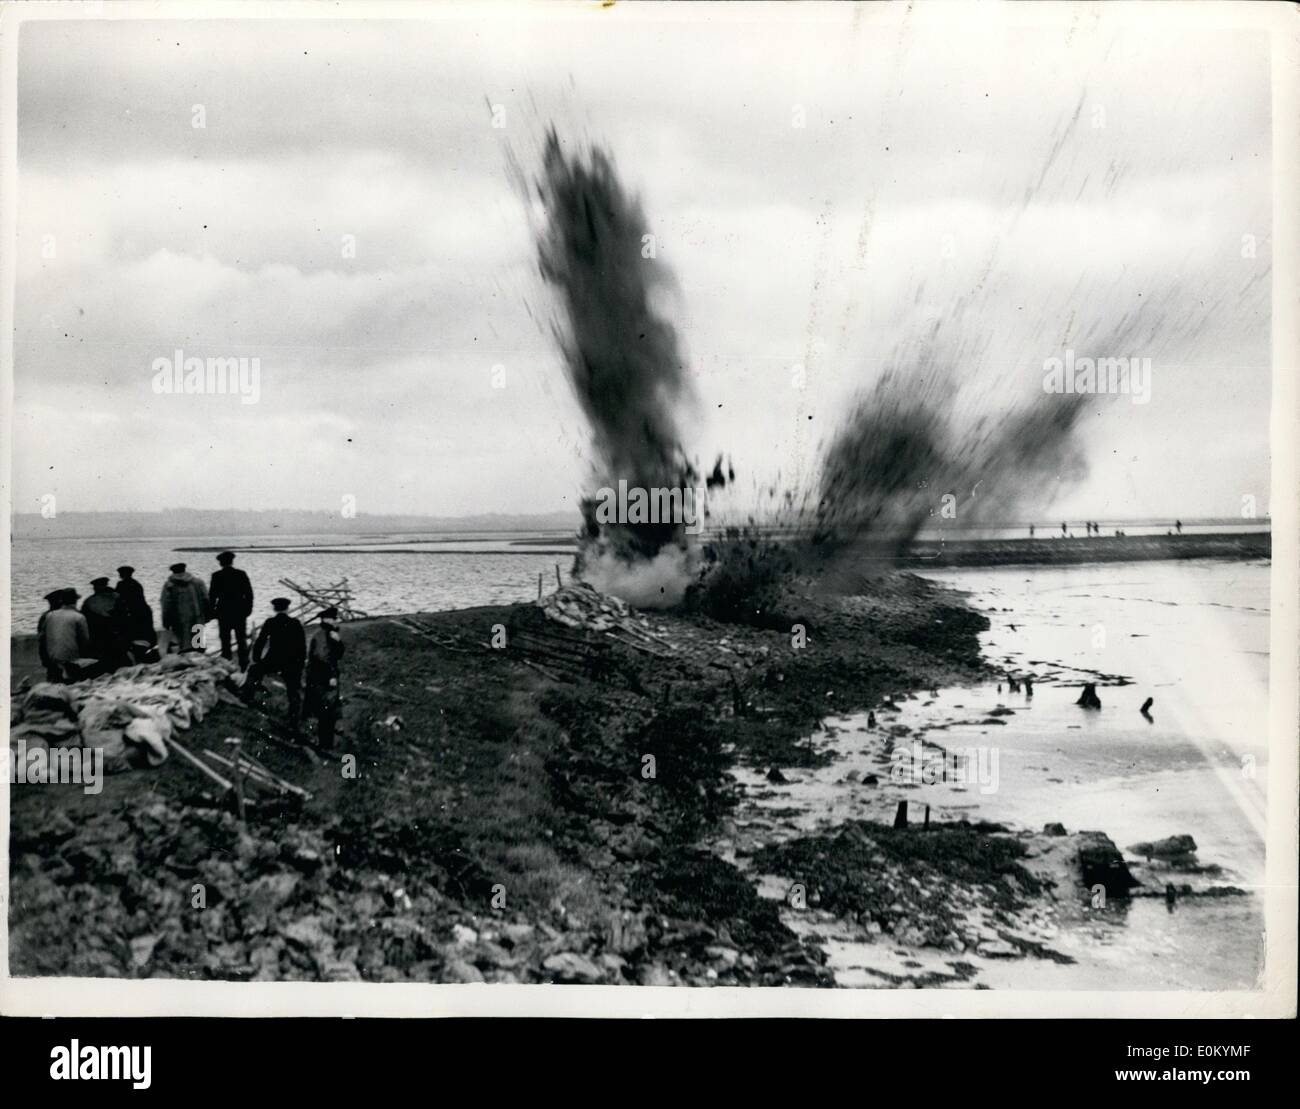 Feb. 02, 1953 - Navy blows up the flood walls. Draining the marshlands at Isle of Sheppey.: Three hundred men of the Royal Navy Stock Photo